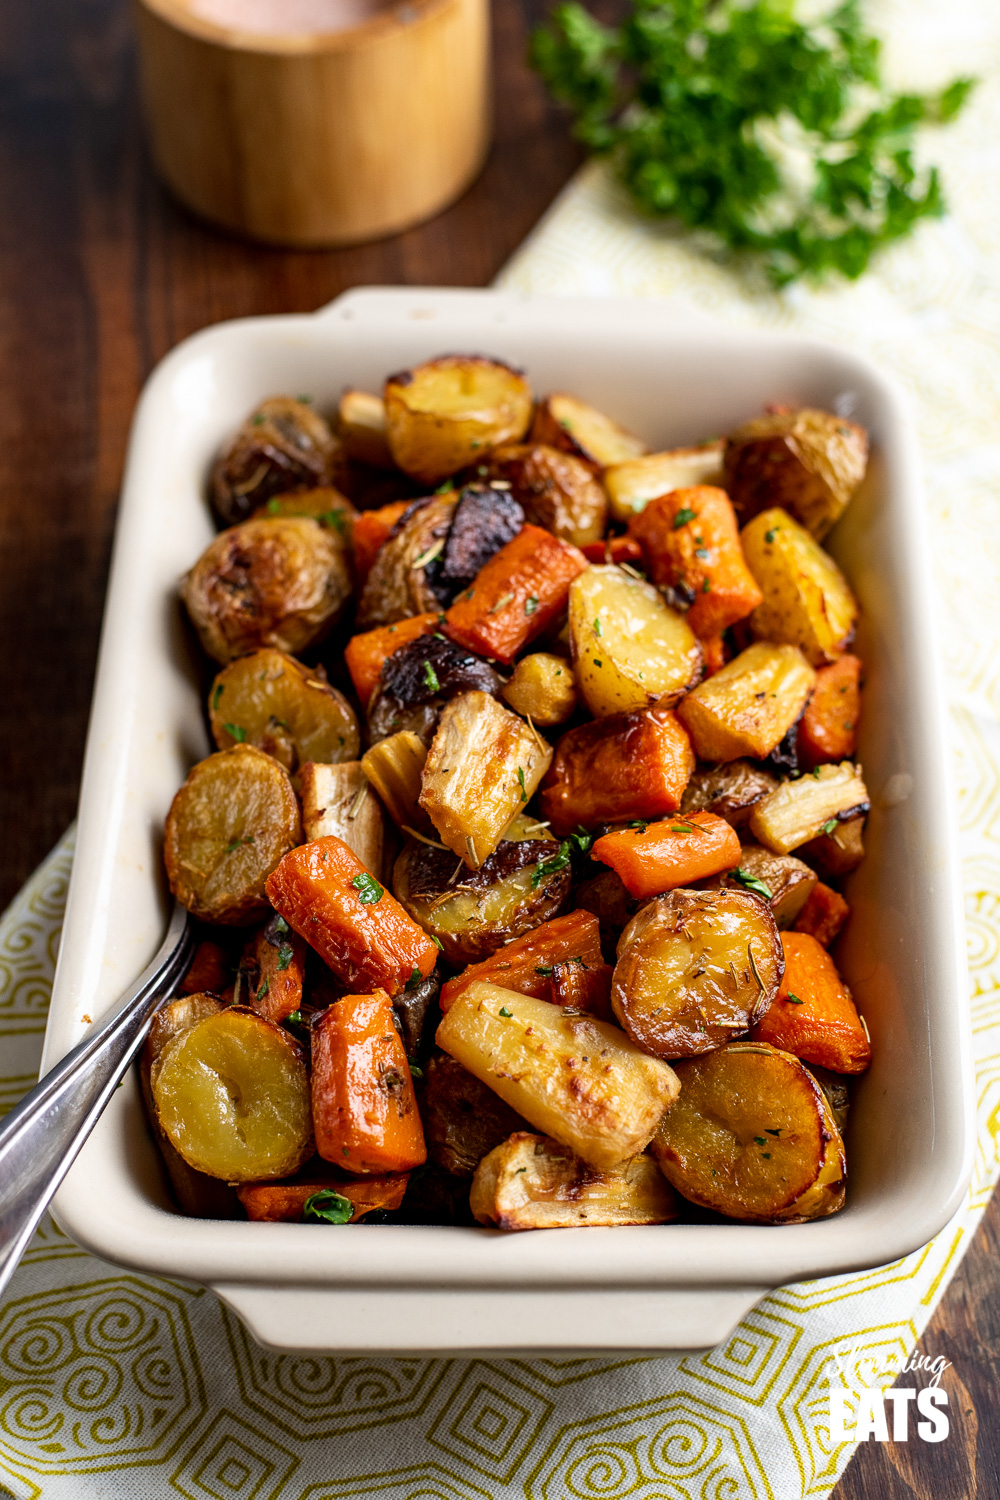  Rosemary Roasted Potatoes, Parsnips, Carrots and Onion in dish with metal spoon